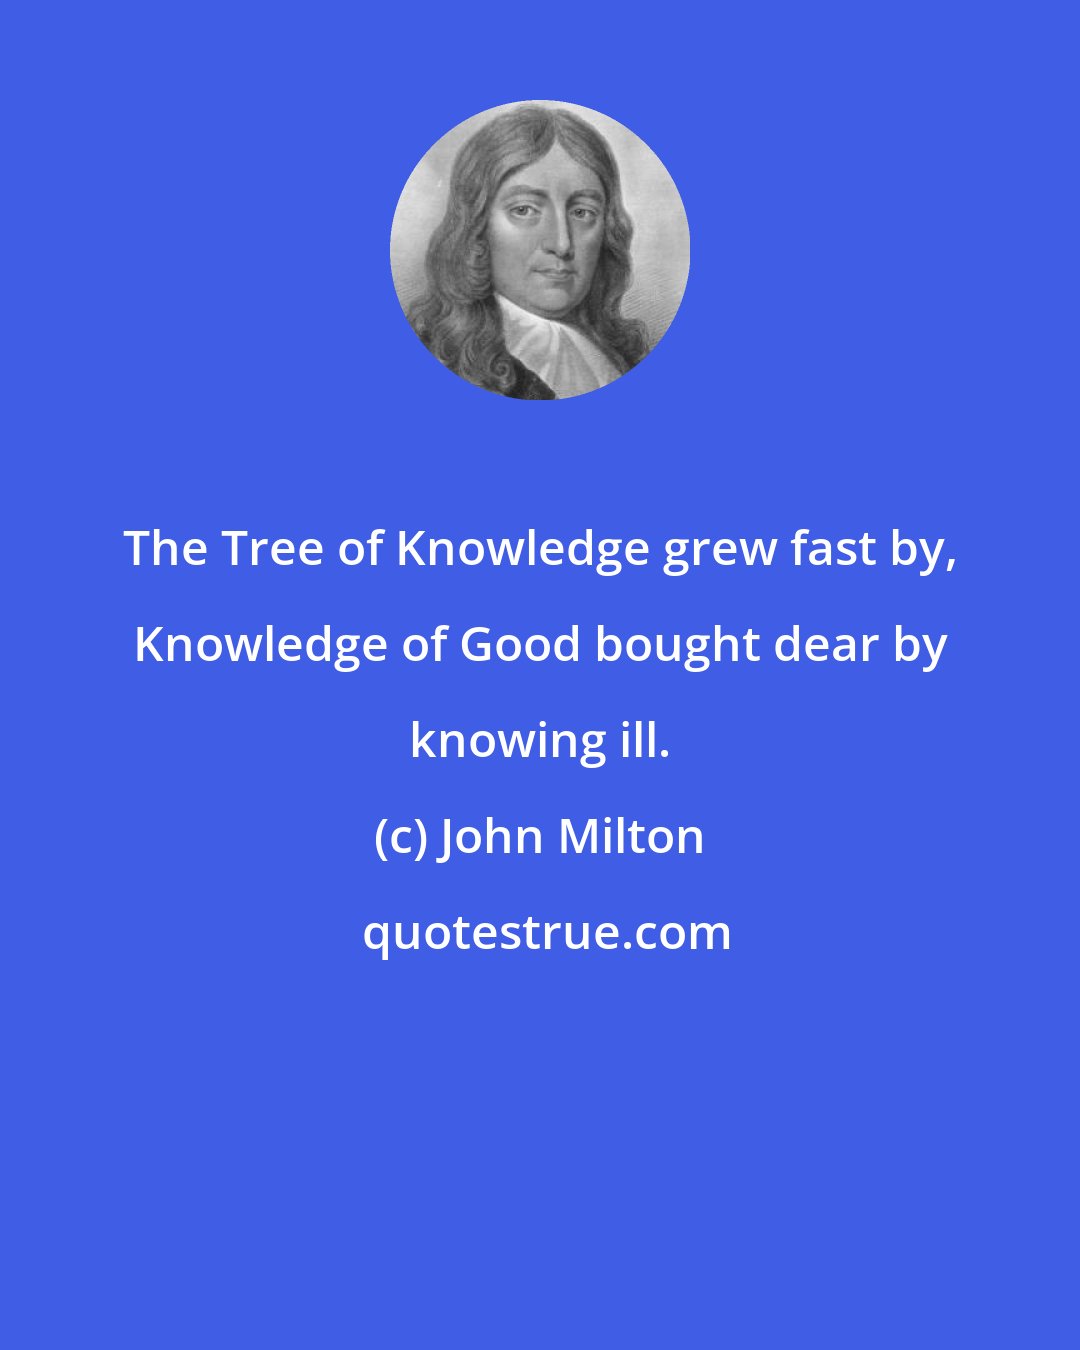 John Milton: The Tree of Knowledge grew fast by, Knowledge of Good bought dear by knowing ill.